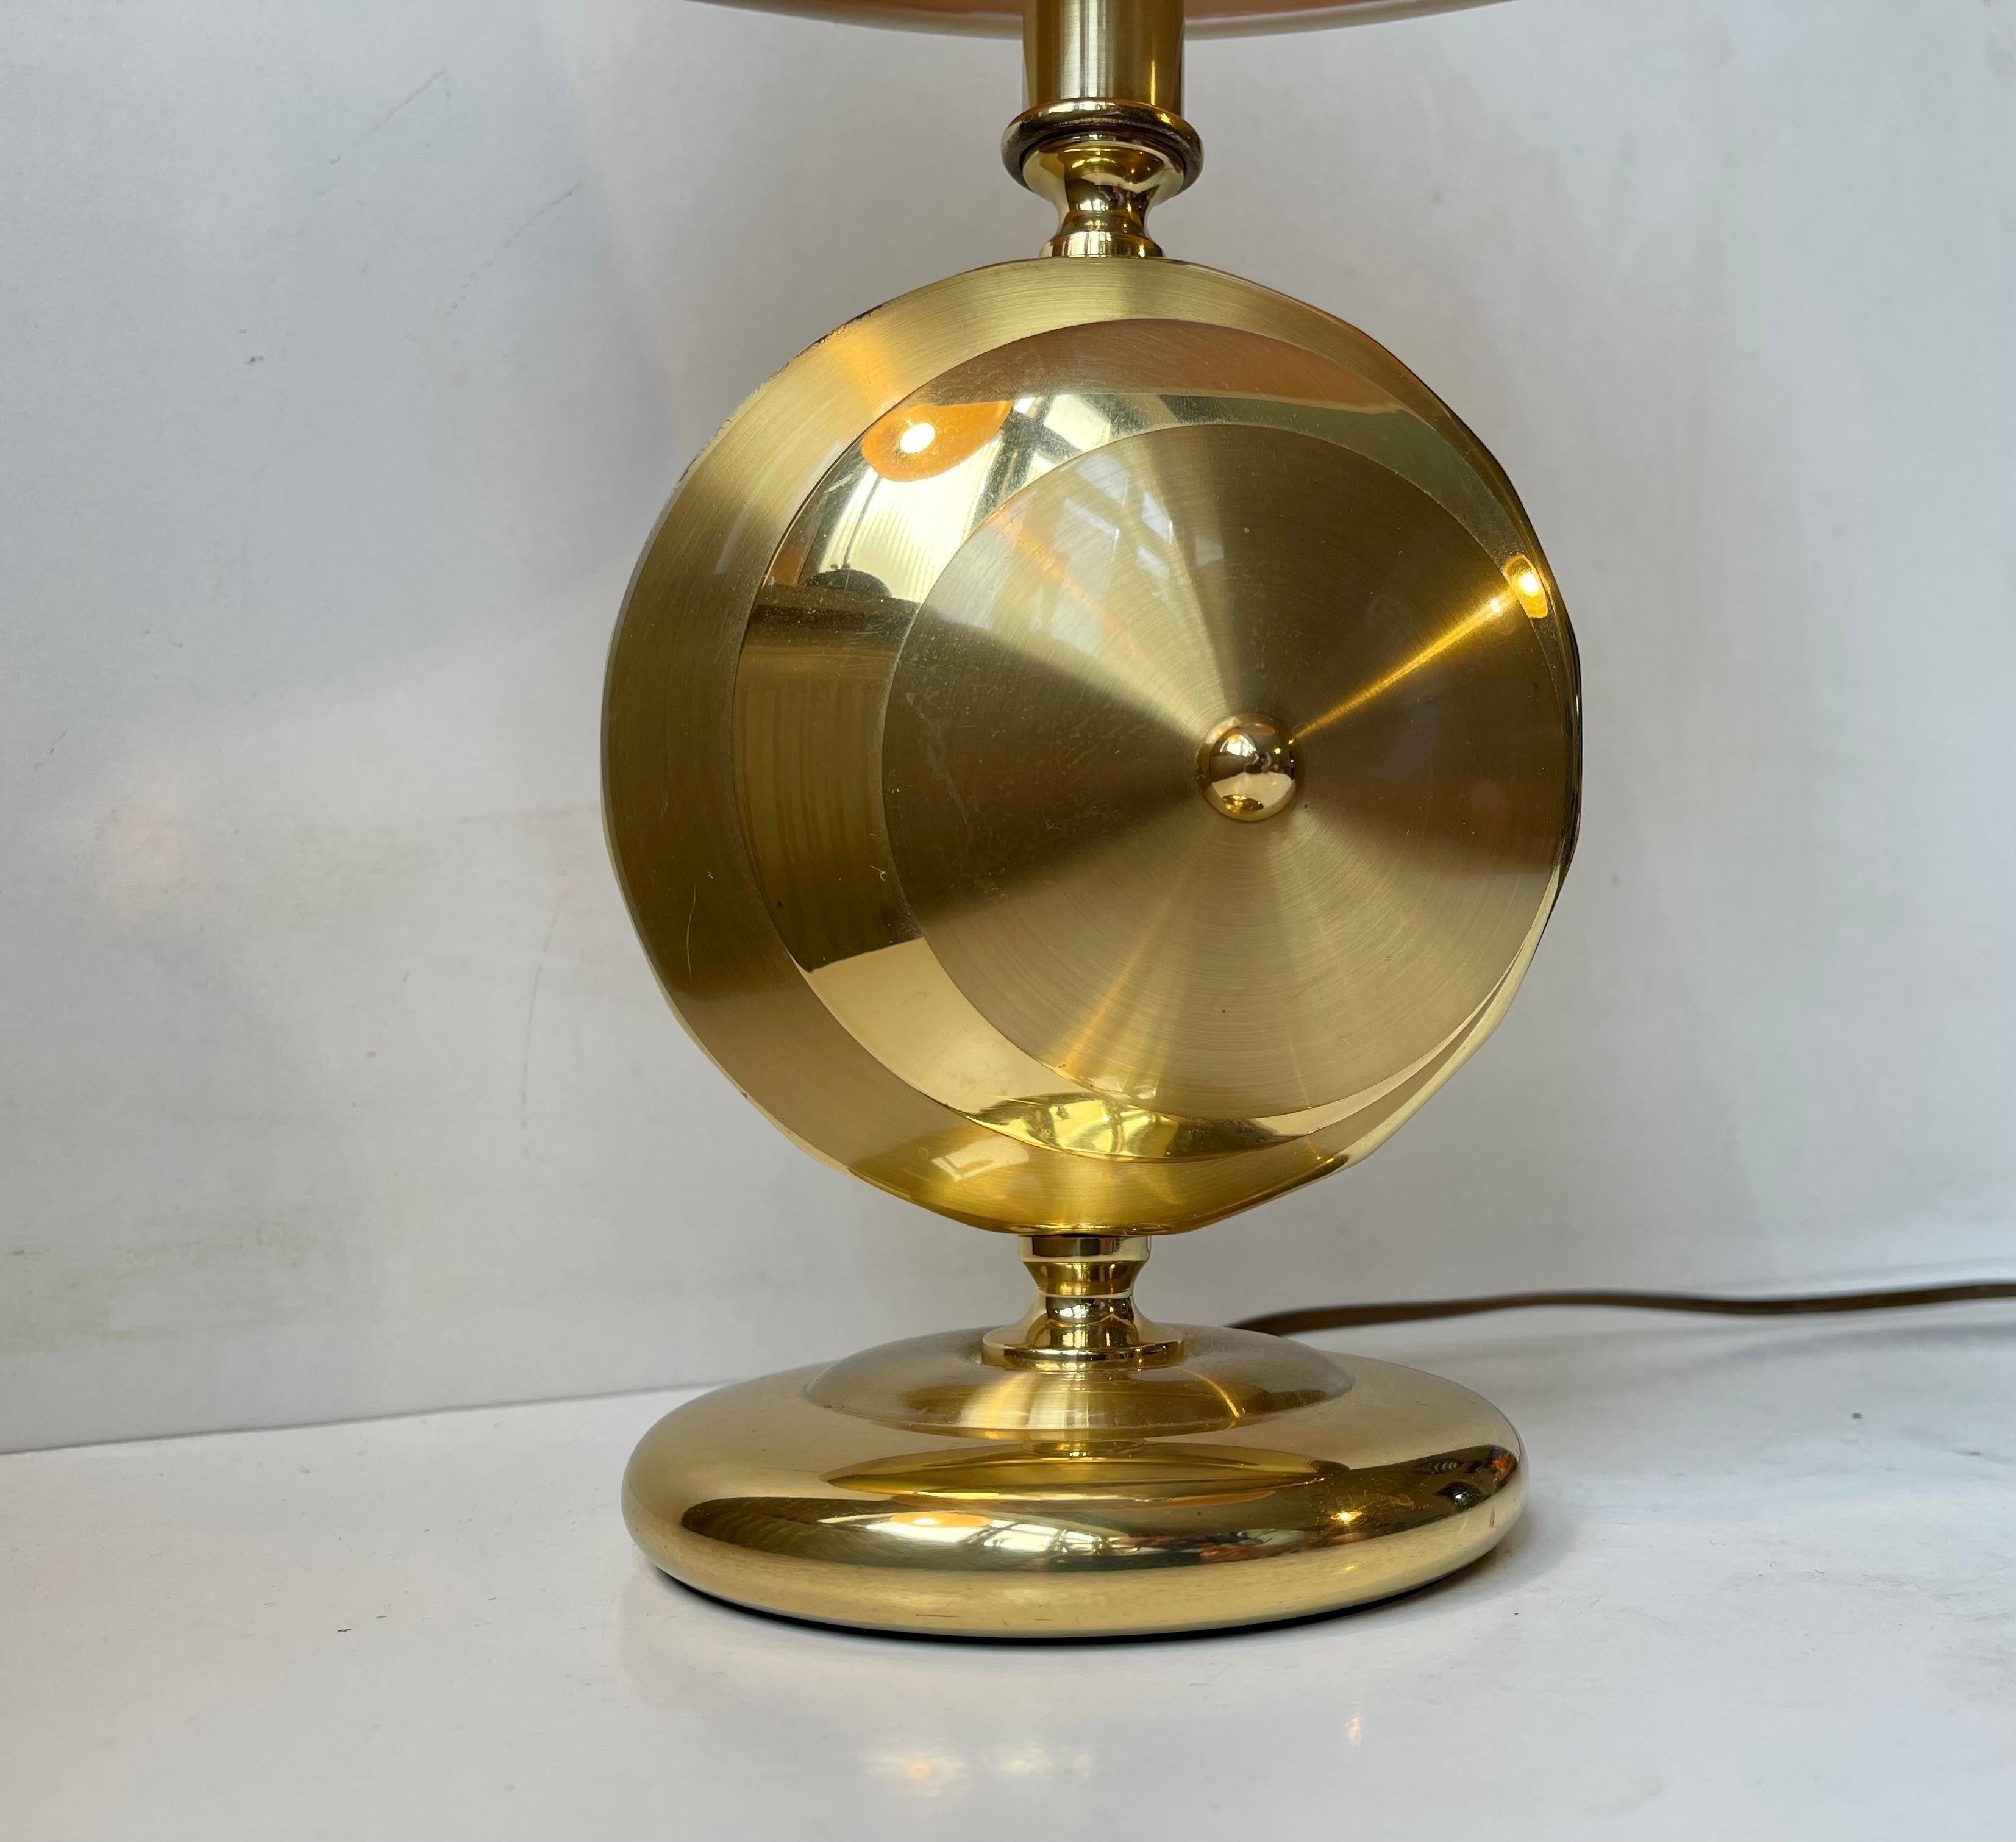 Danish Art Deco Revival Mantle Table Lamp in Brass by TS Belysning, 1980s For Sale